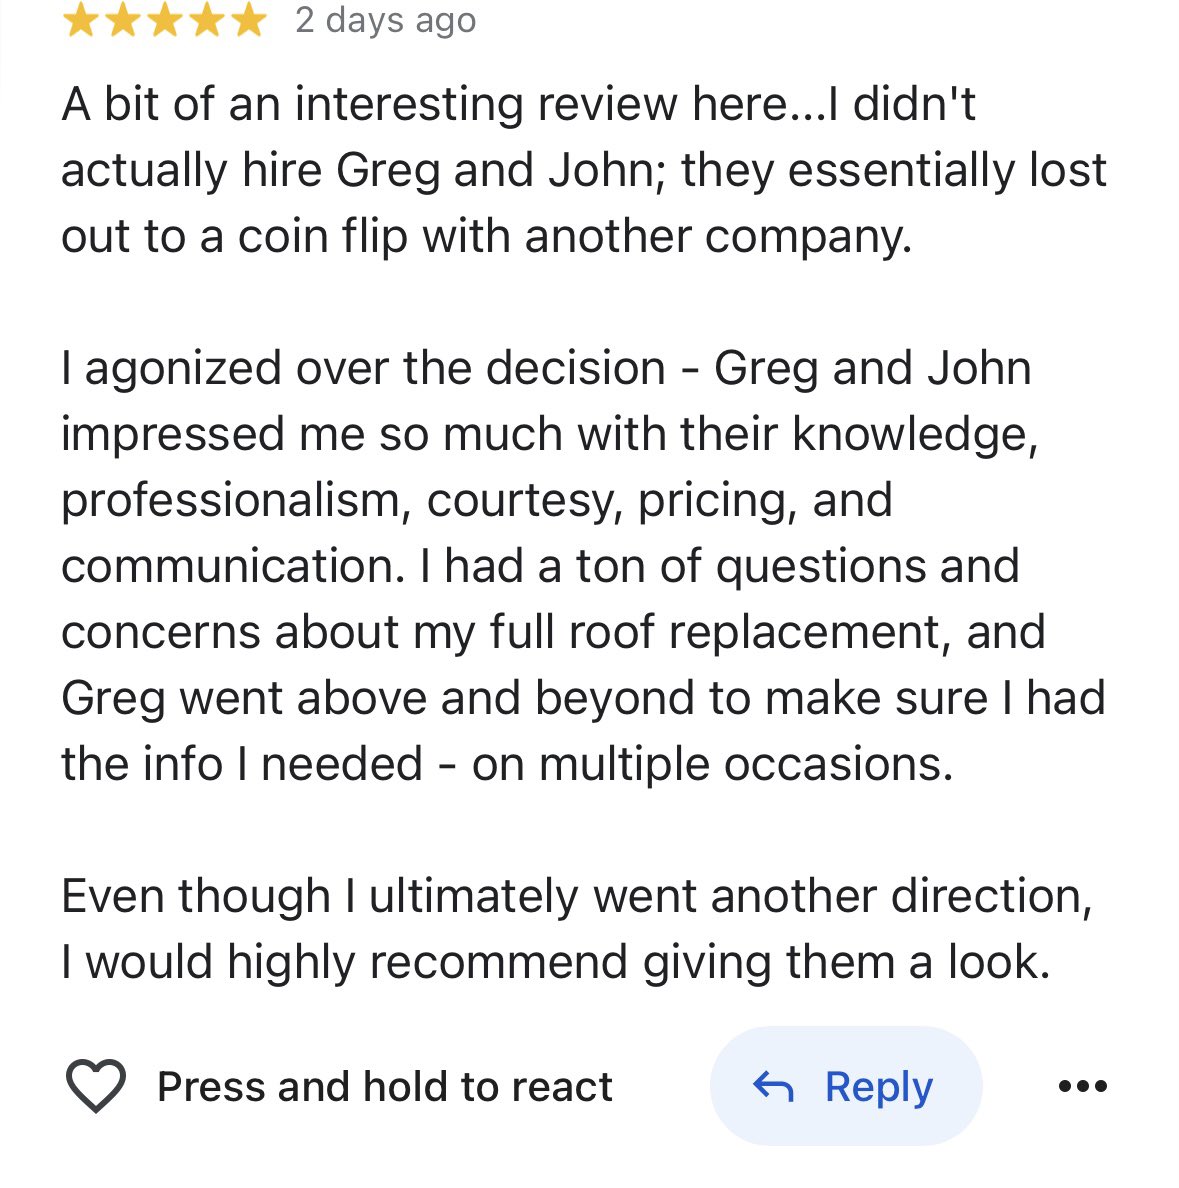 How would you feel about a potential customer giving you a 5-star review after choosing to go with the competition?